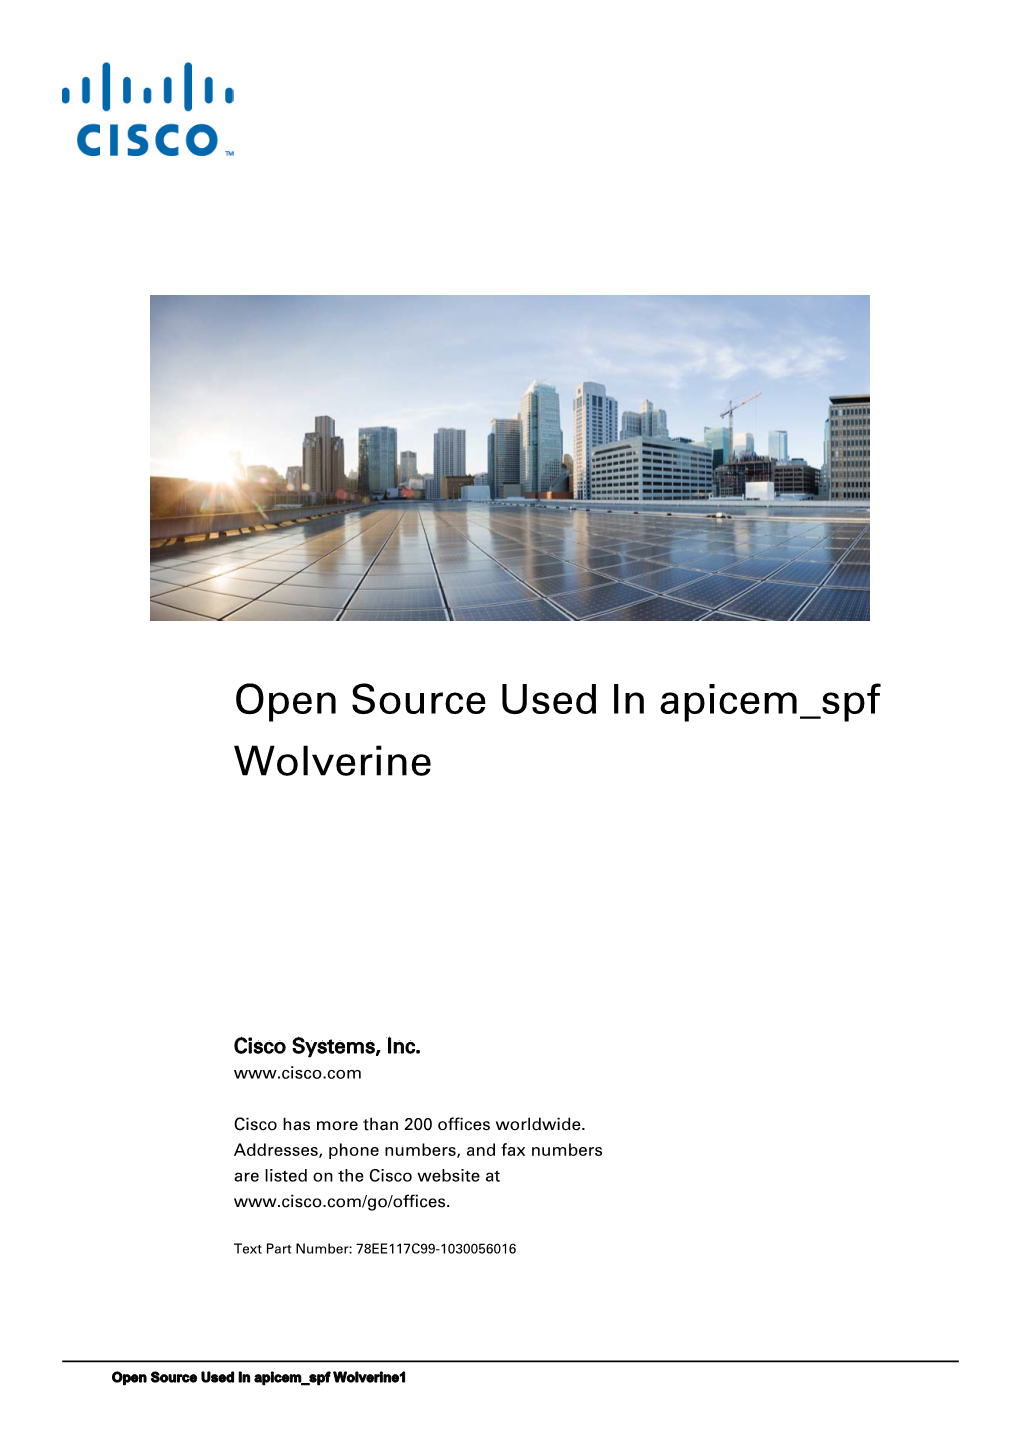 Open Source Used in Apicem Spf Wolverine